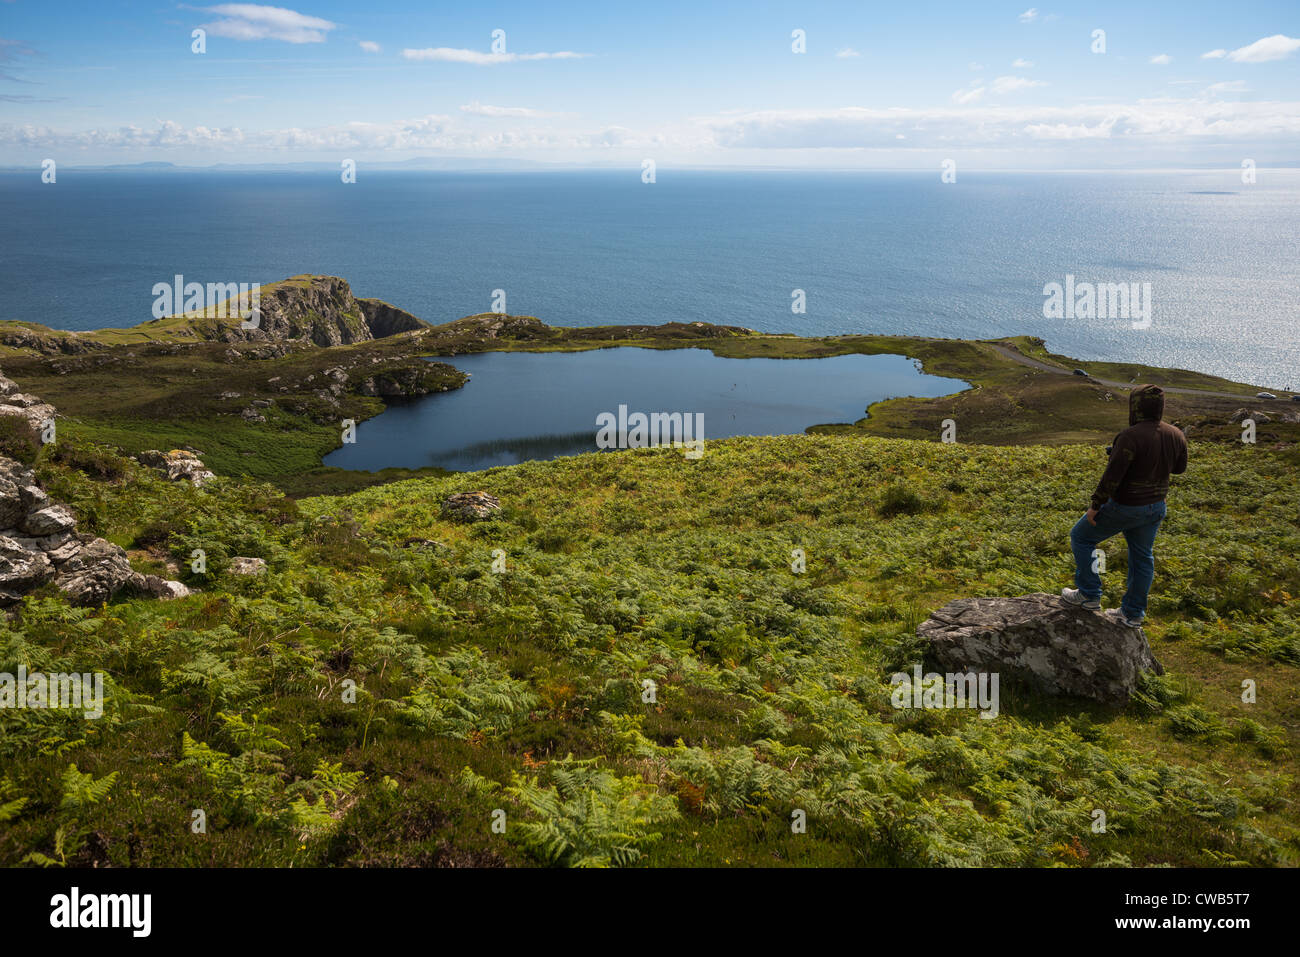 A scenic lake at the Slieve League cliffs with the Atlantic beyond, on the west coast of Donegal, Republic of Ireland. Stock Photo